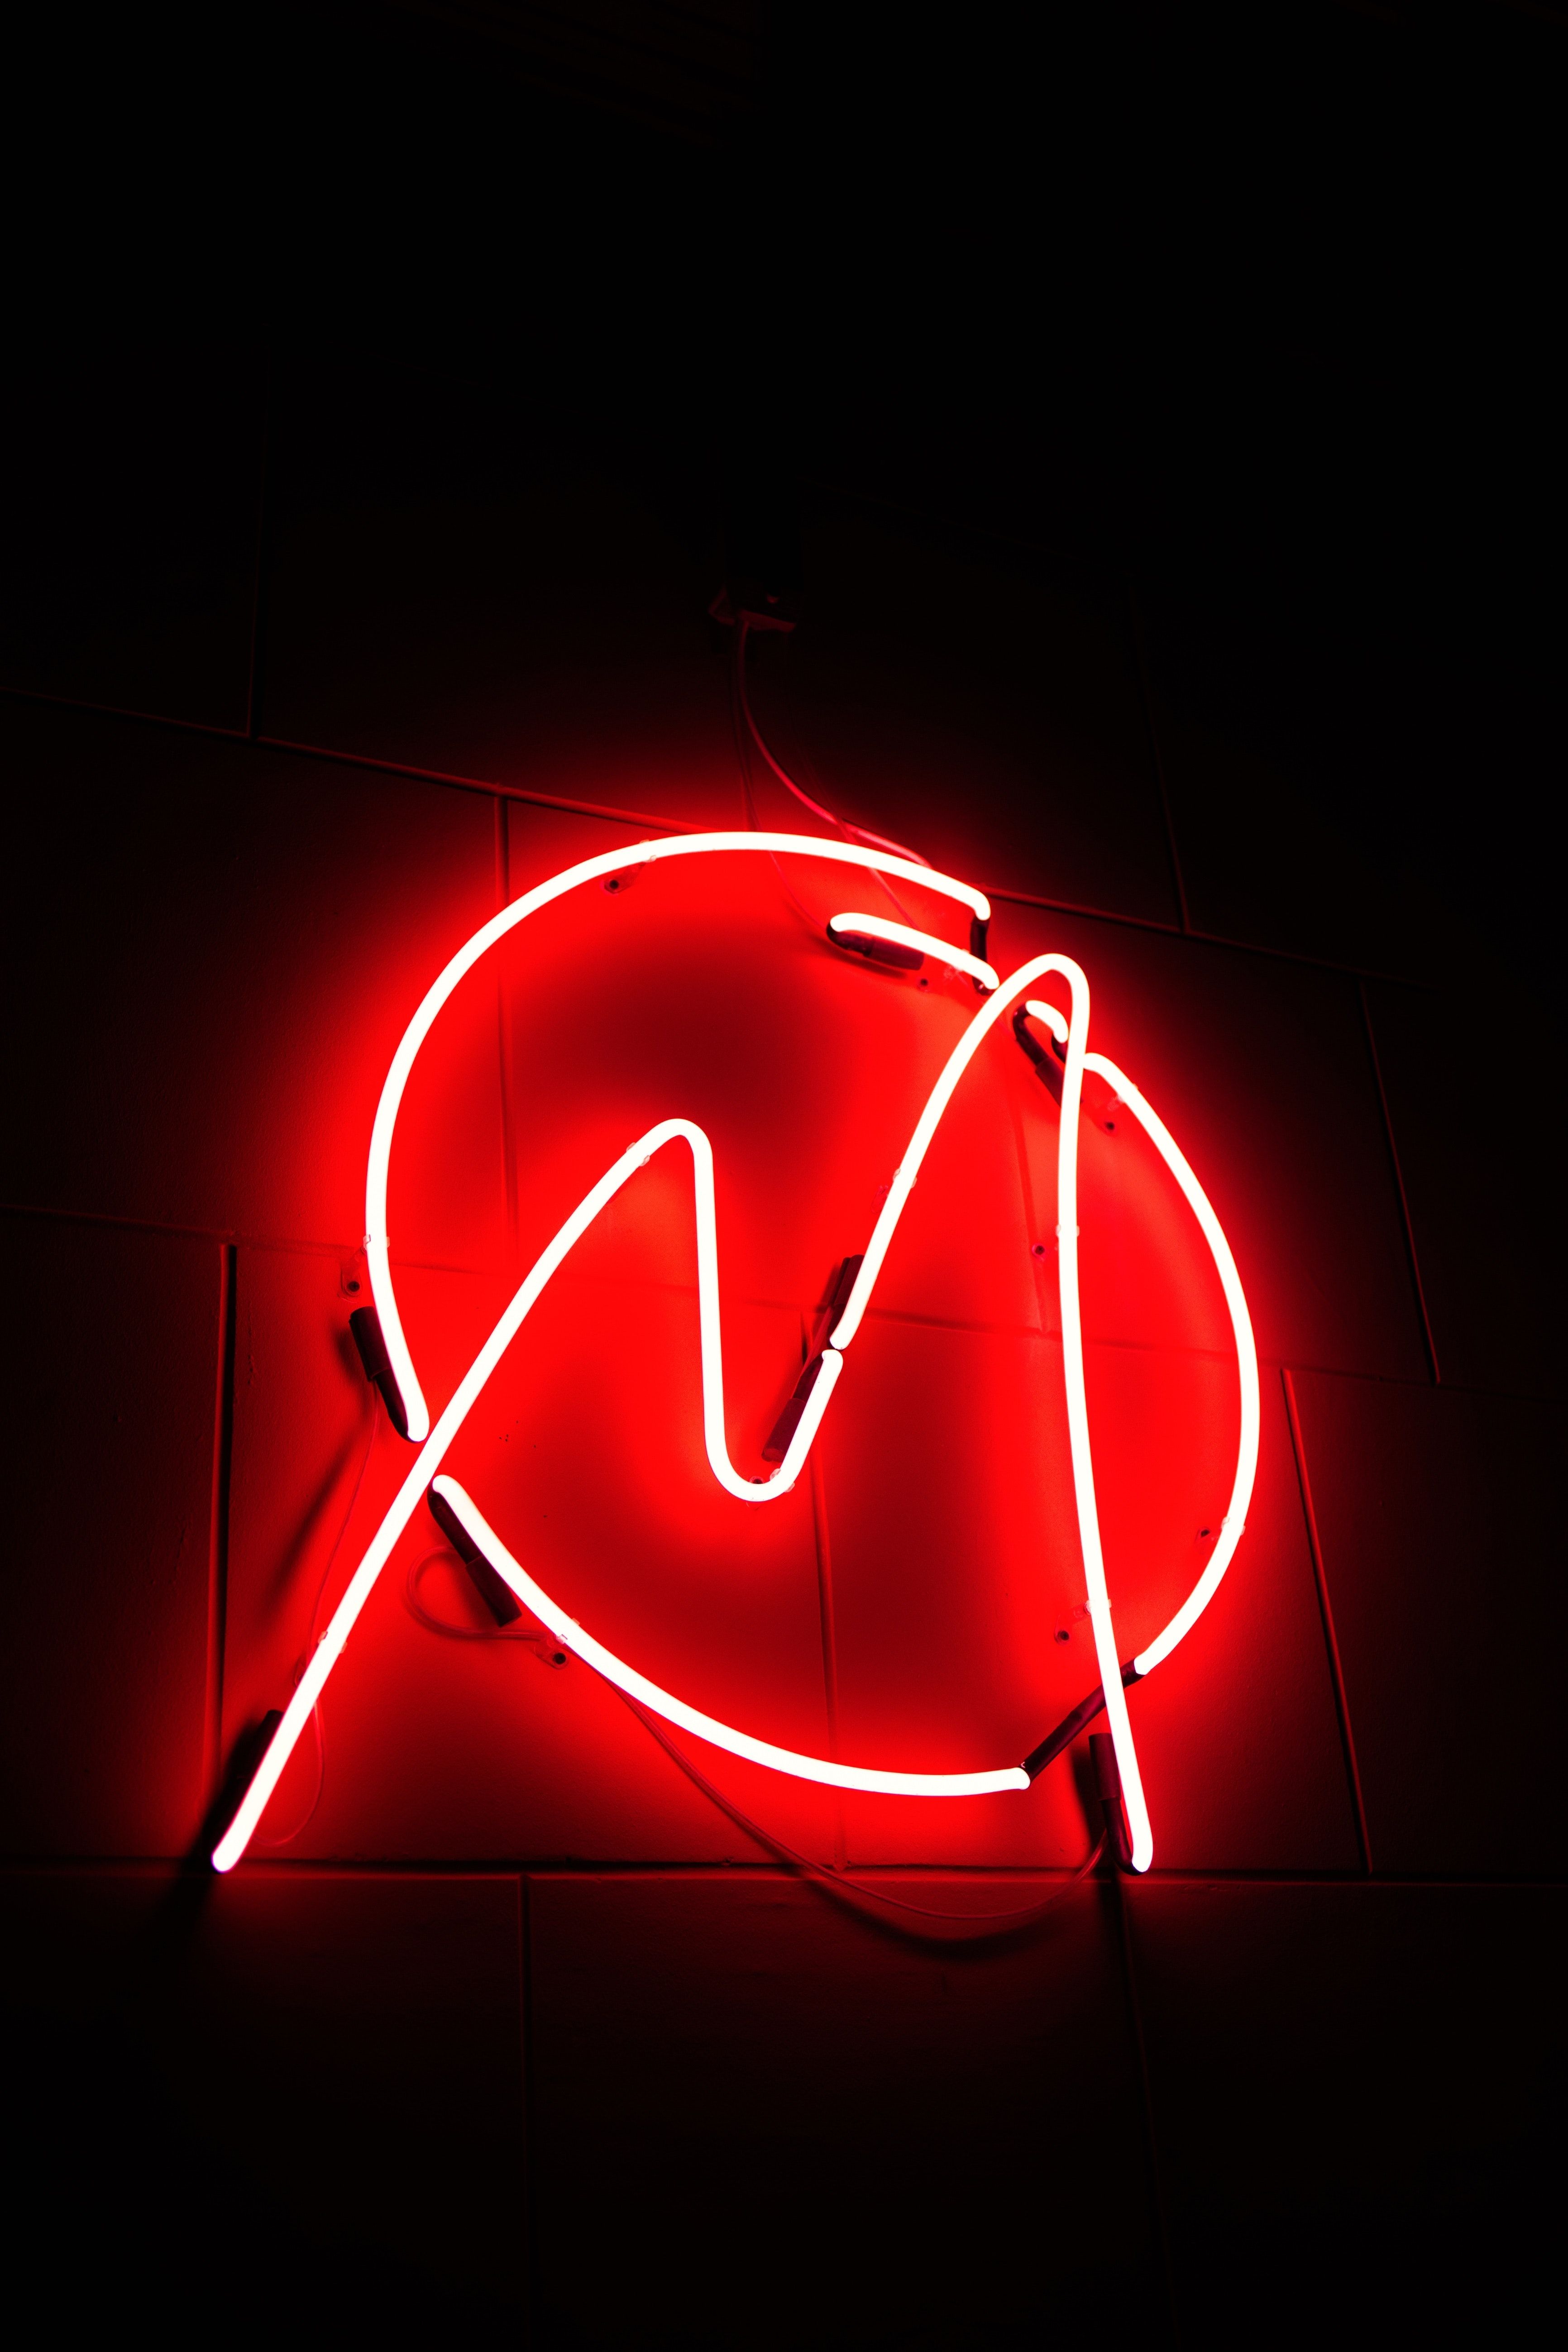 A red neon sign with the letter N on it - Neon red